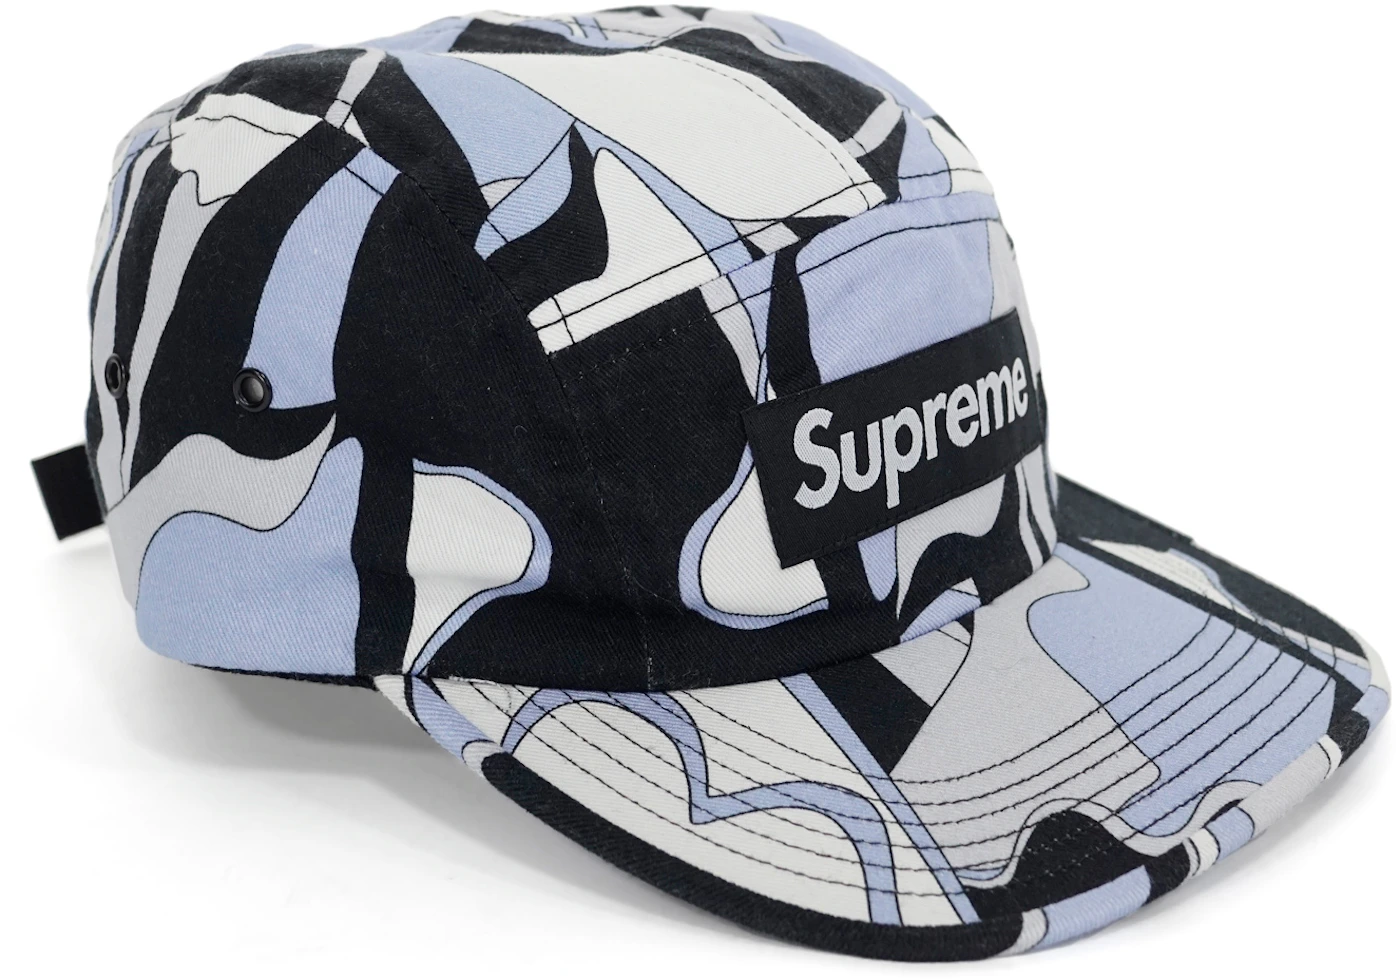 Supreme side panel camp cap + Hypebeast Christian: Prophecy 